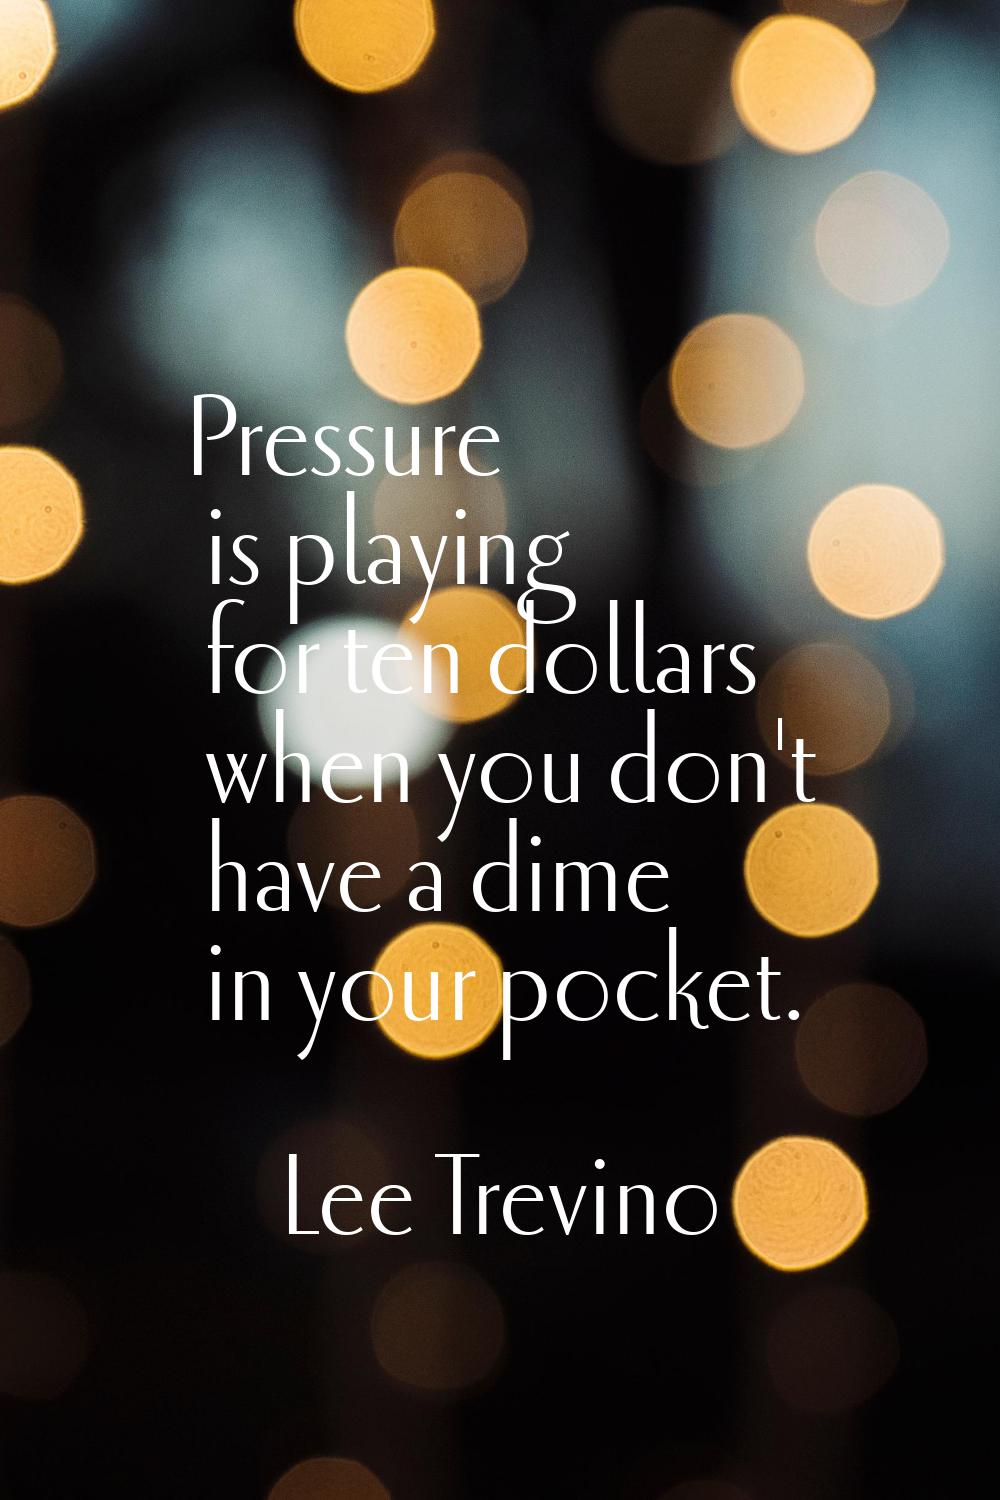 Pressure is playing for ten dollars when you don't have a dime in your pocket.